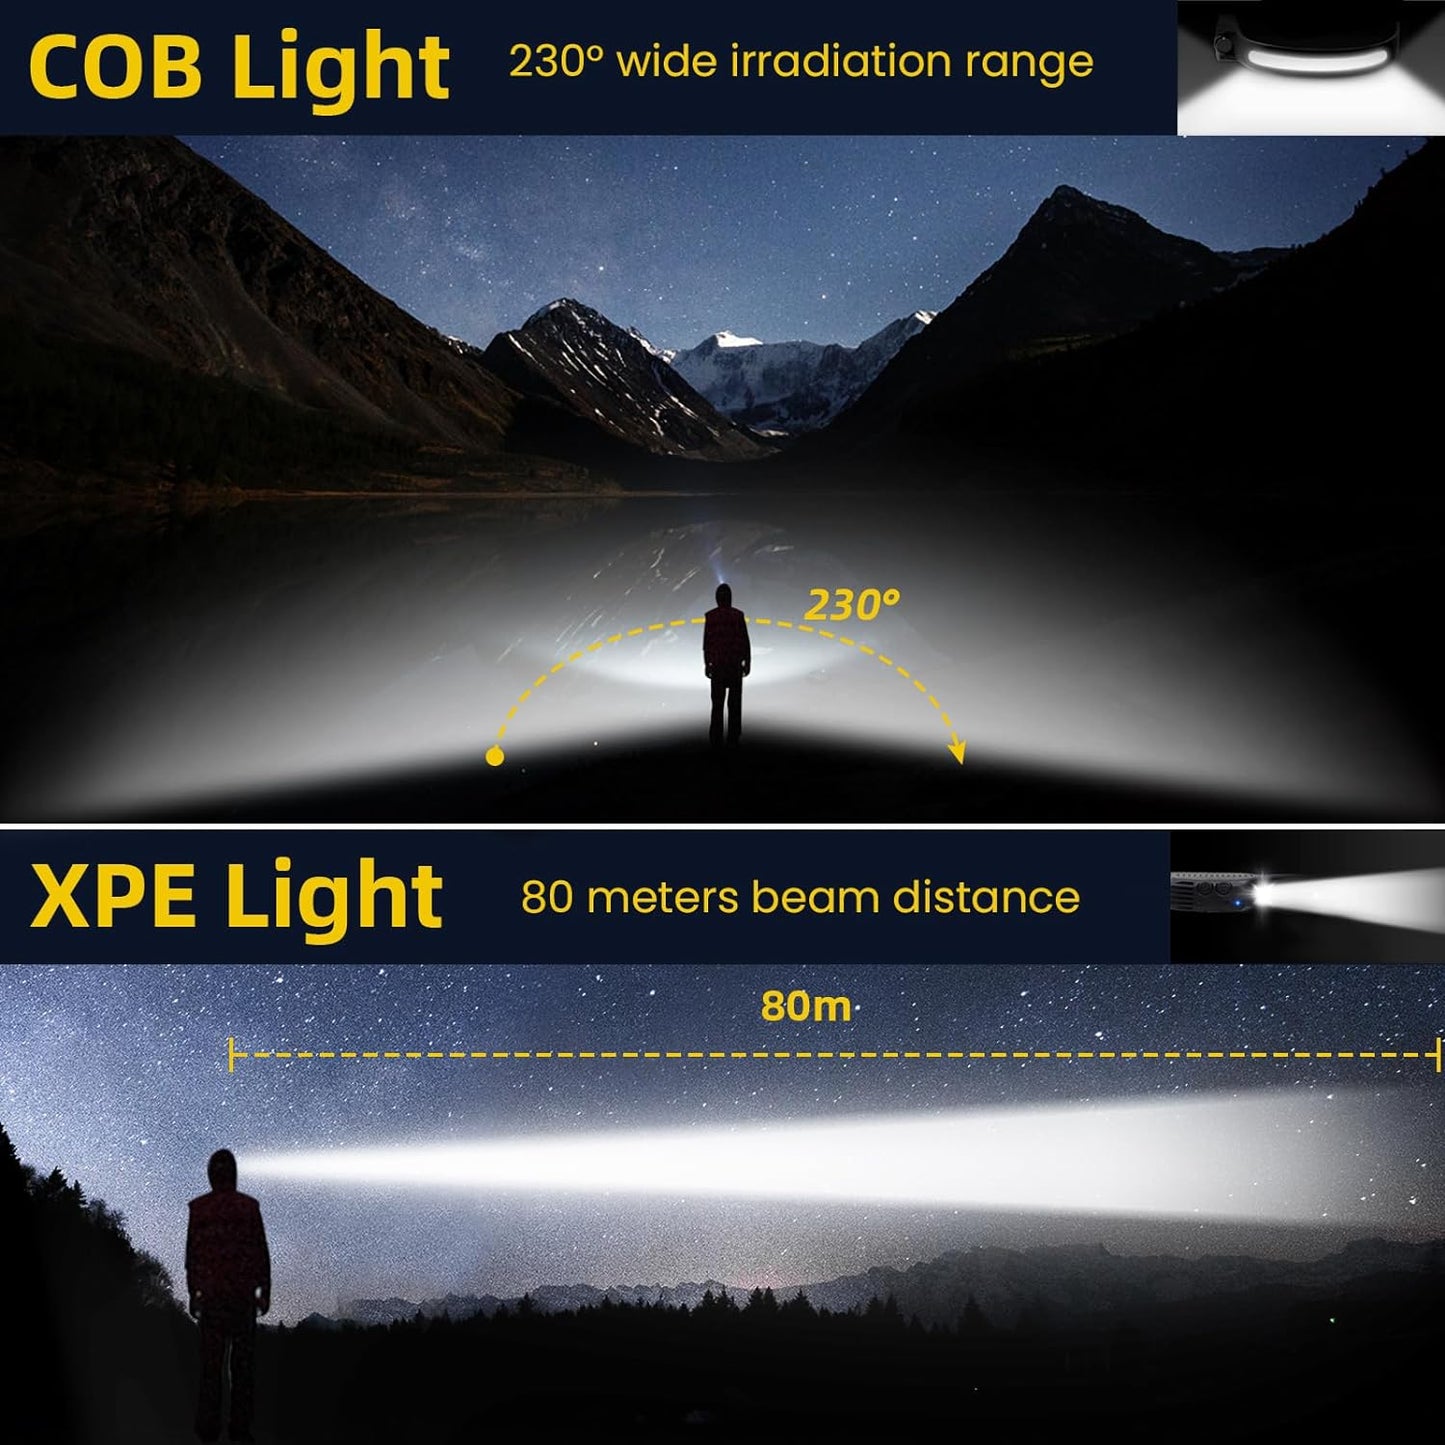 Rechargeable LED Headlamp 2 Packs,Cob230° Wide Beam Headlamps, 5 Modes of Lightweight Headlamps with Motion Sensors, Type-C USB Charging Headlamps,Suitable for Night Running,Fishing, Cycling, Camping